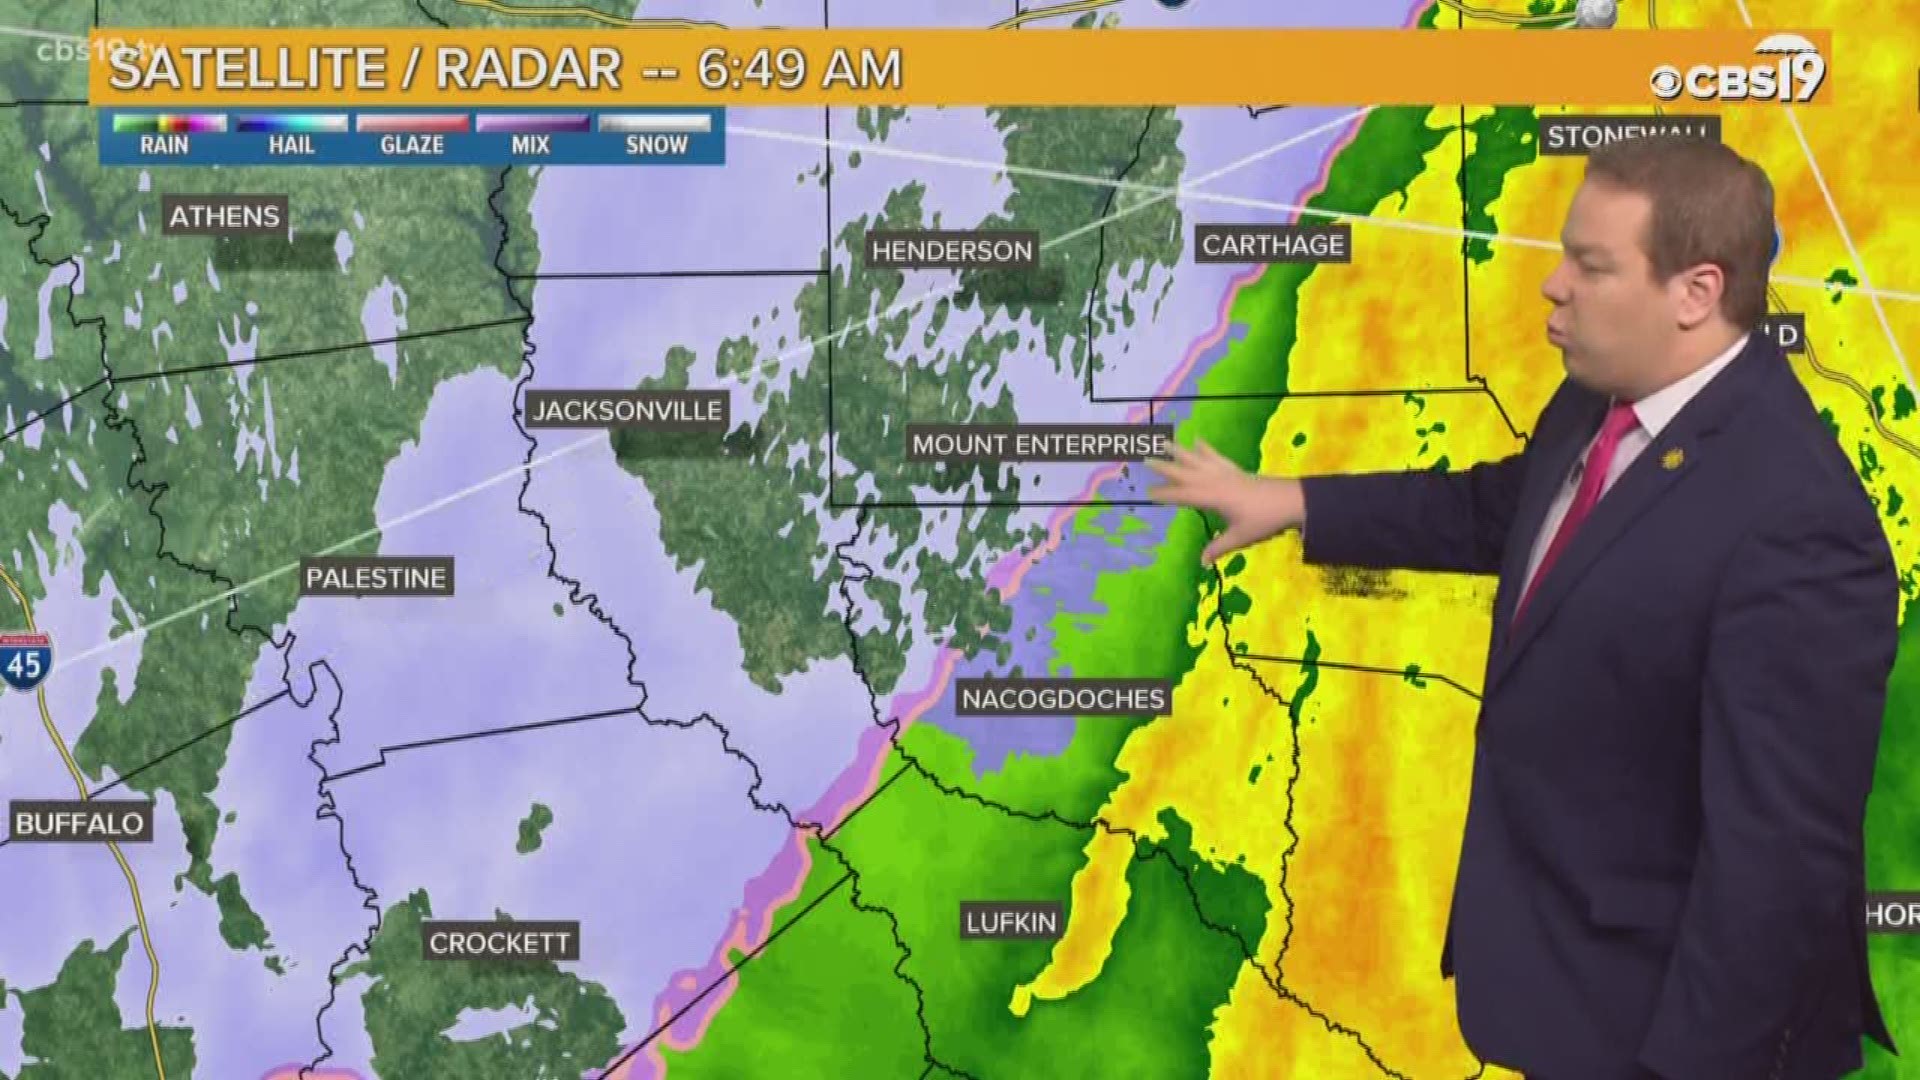 We had a wintry mix and some light snow around East Texas this morning, but that is moving out for this afternoon. Meteorologist Michael Behrens has the latest.